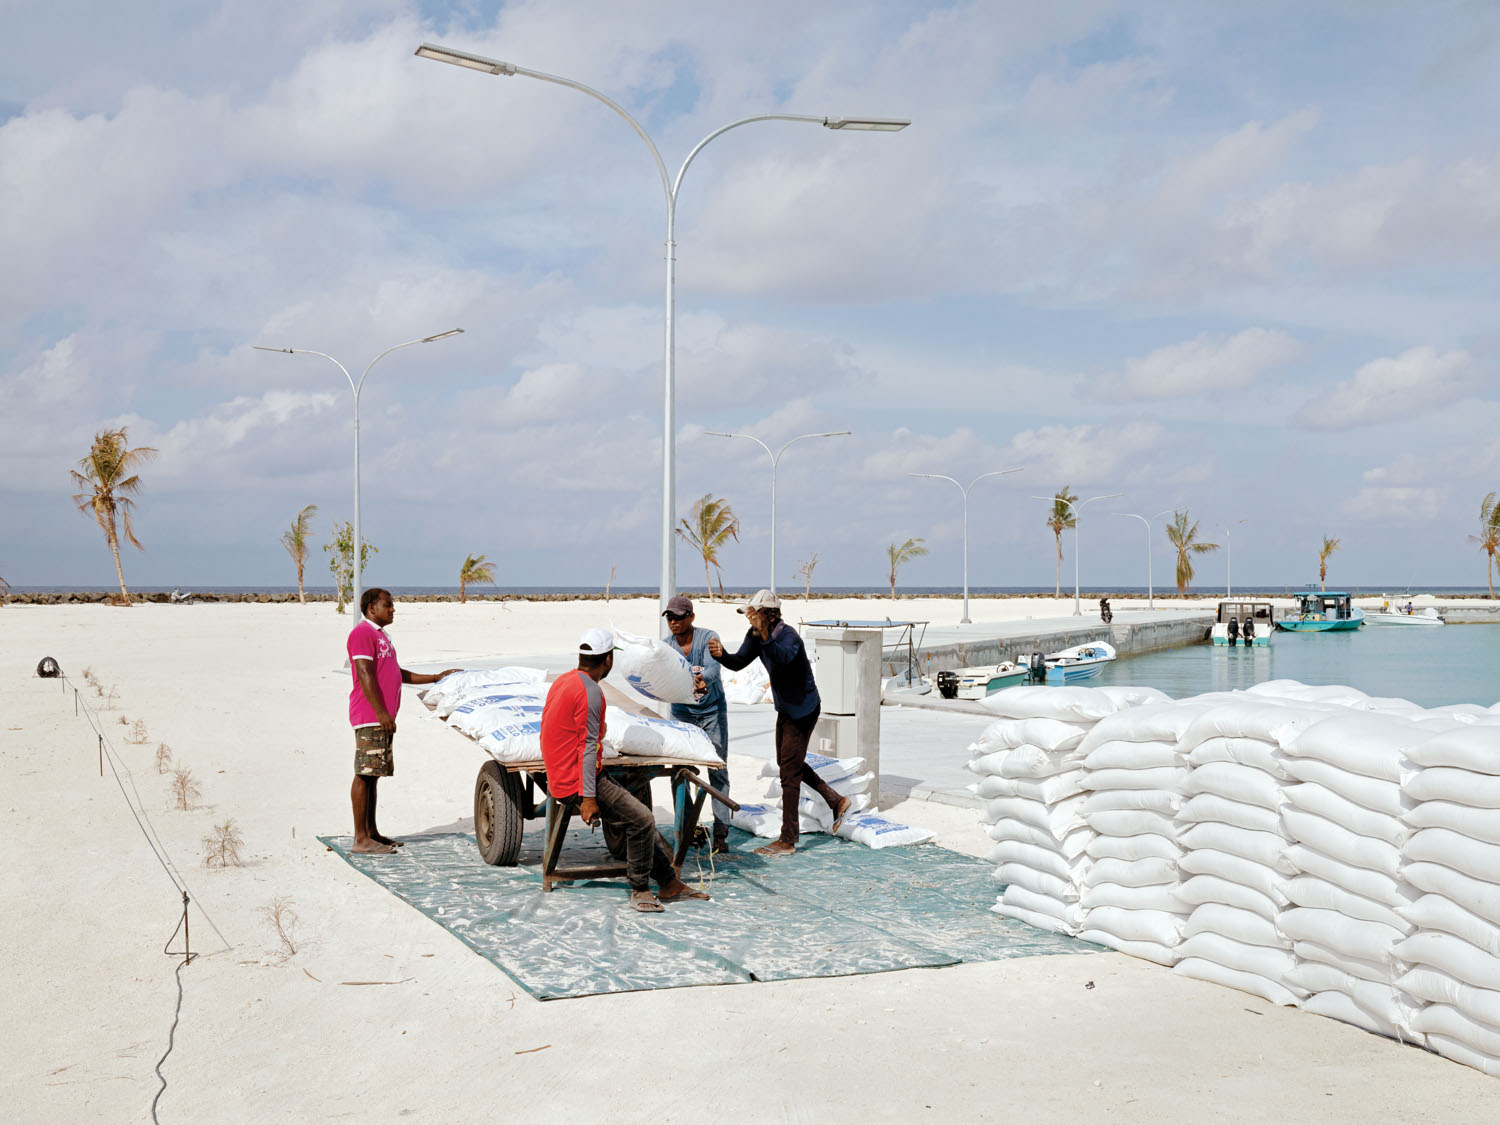 Workers on the island of Fulhadhoo.